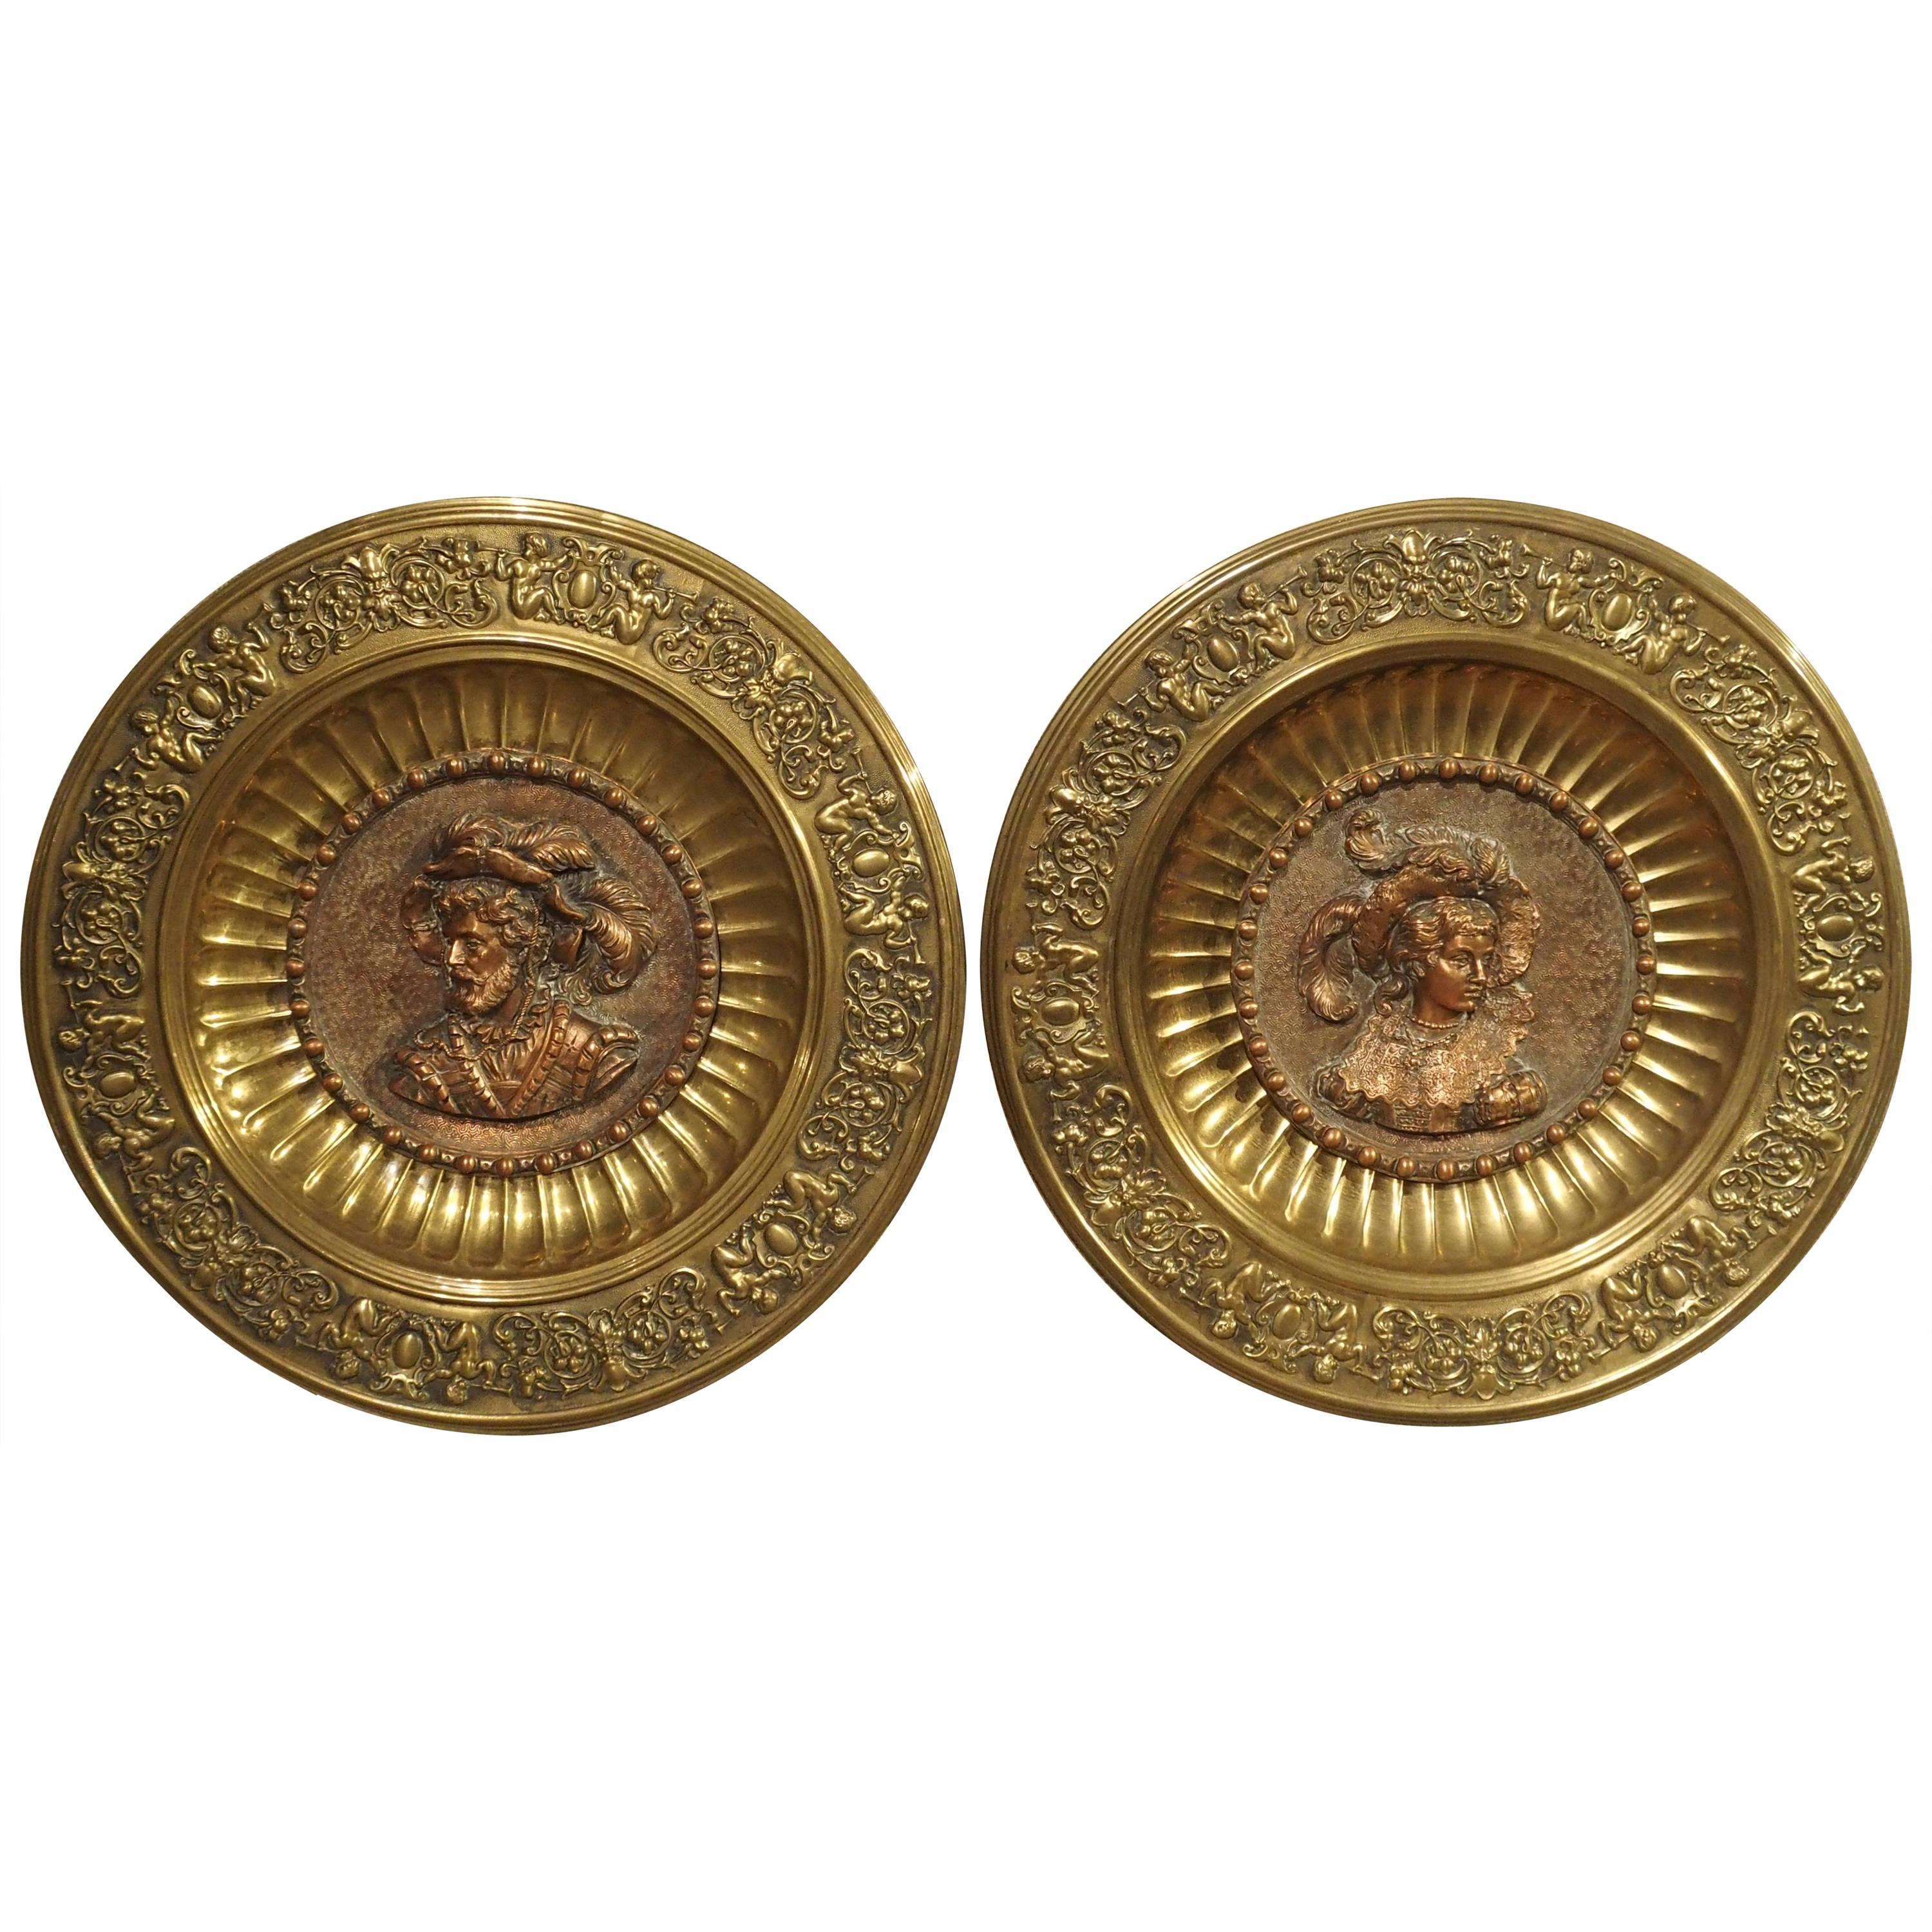 Pair of Antique Copper and Brass Repousse Platters from Spain, circa 1900